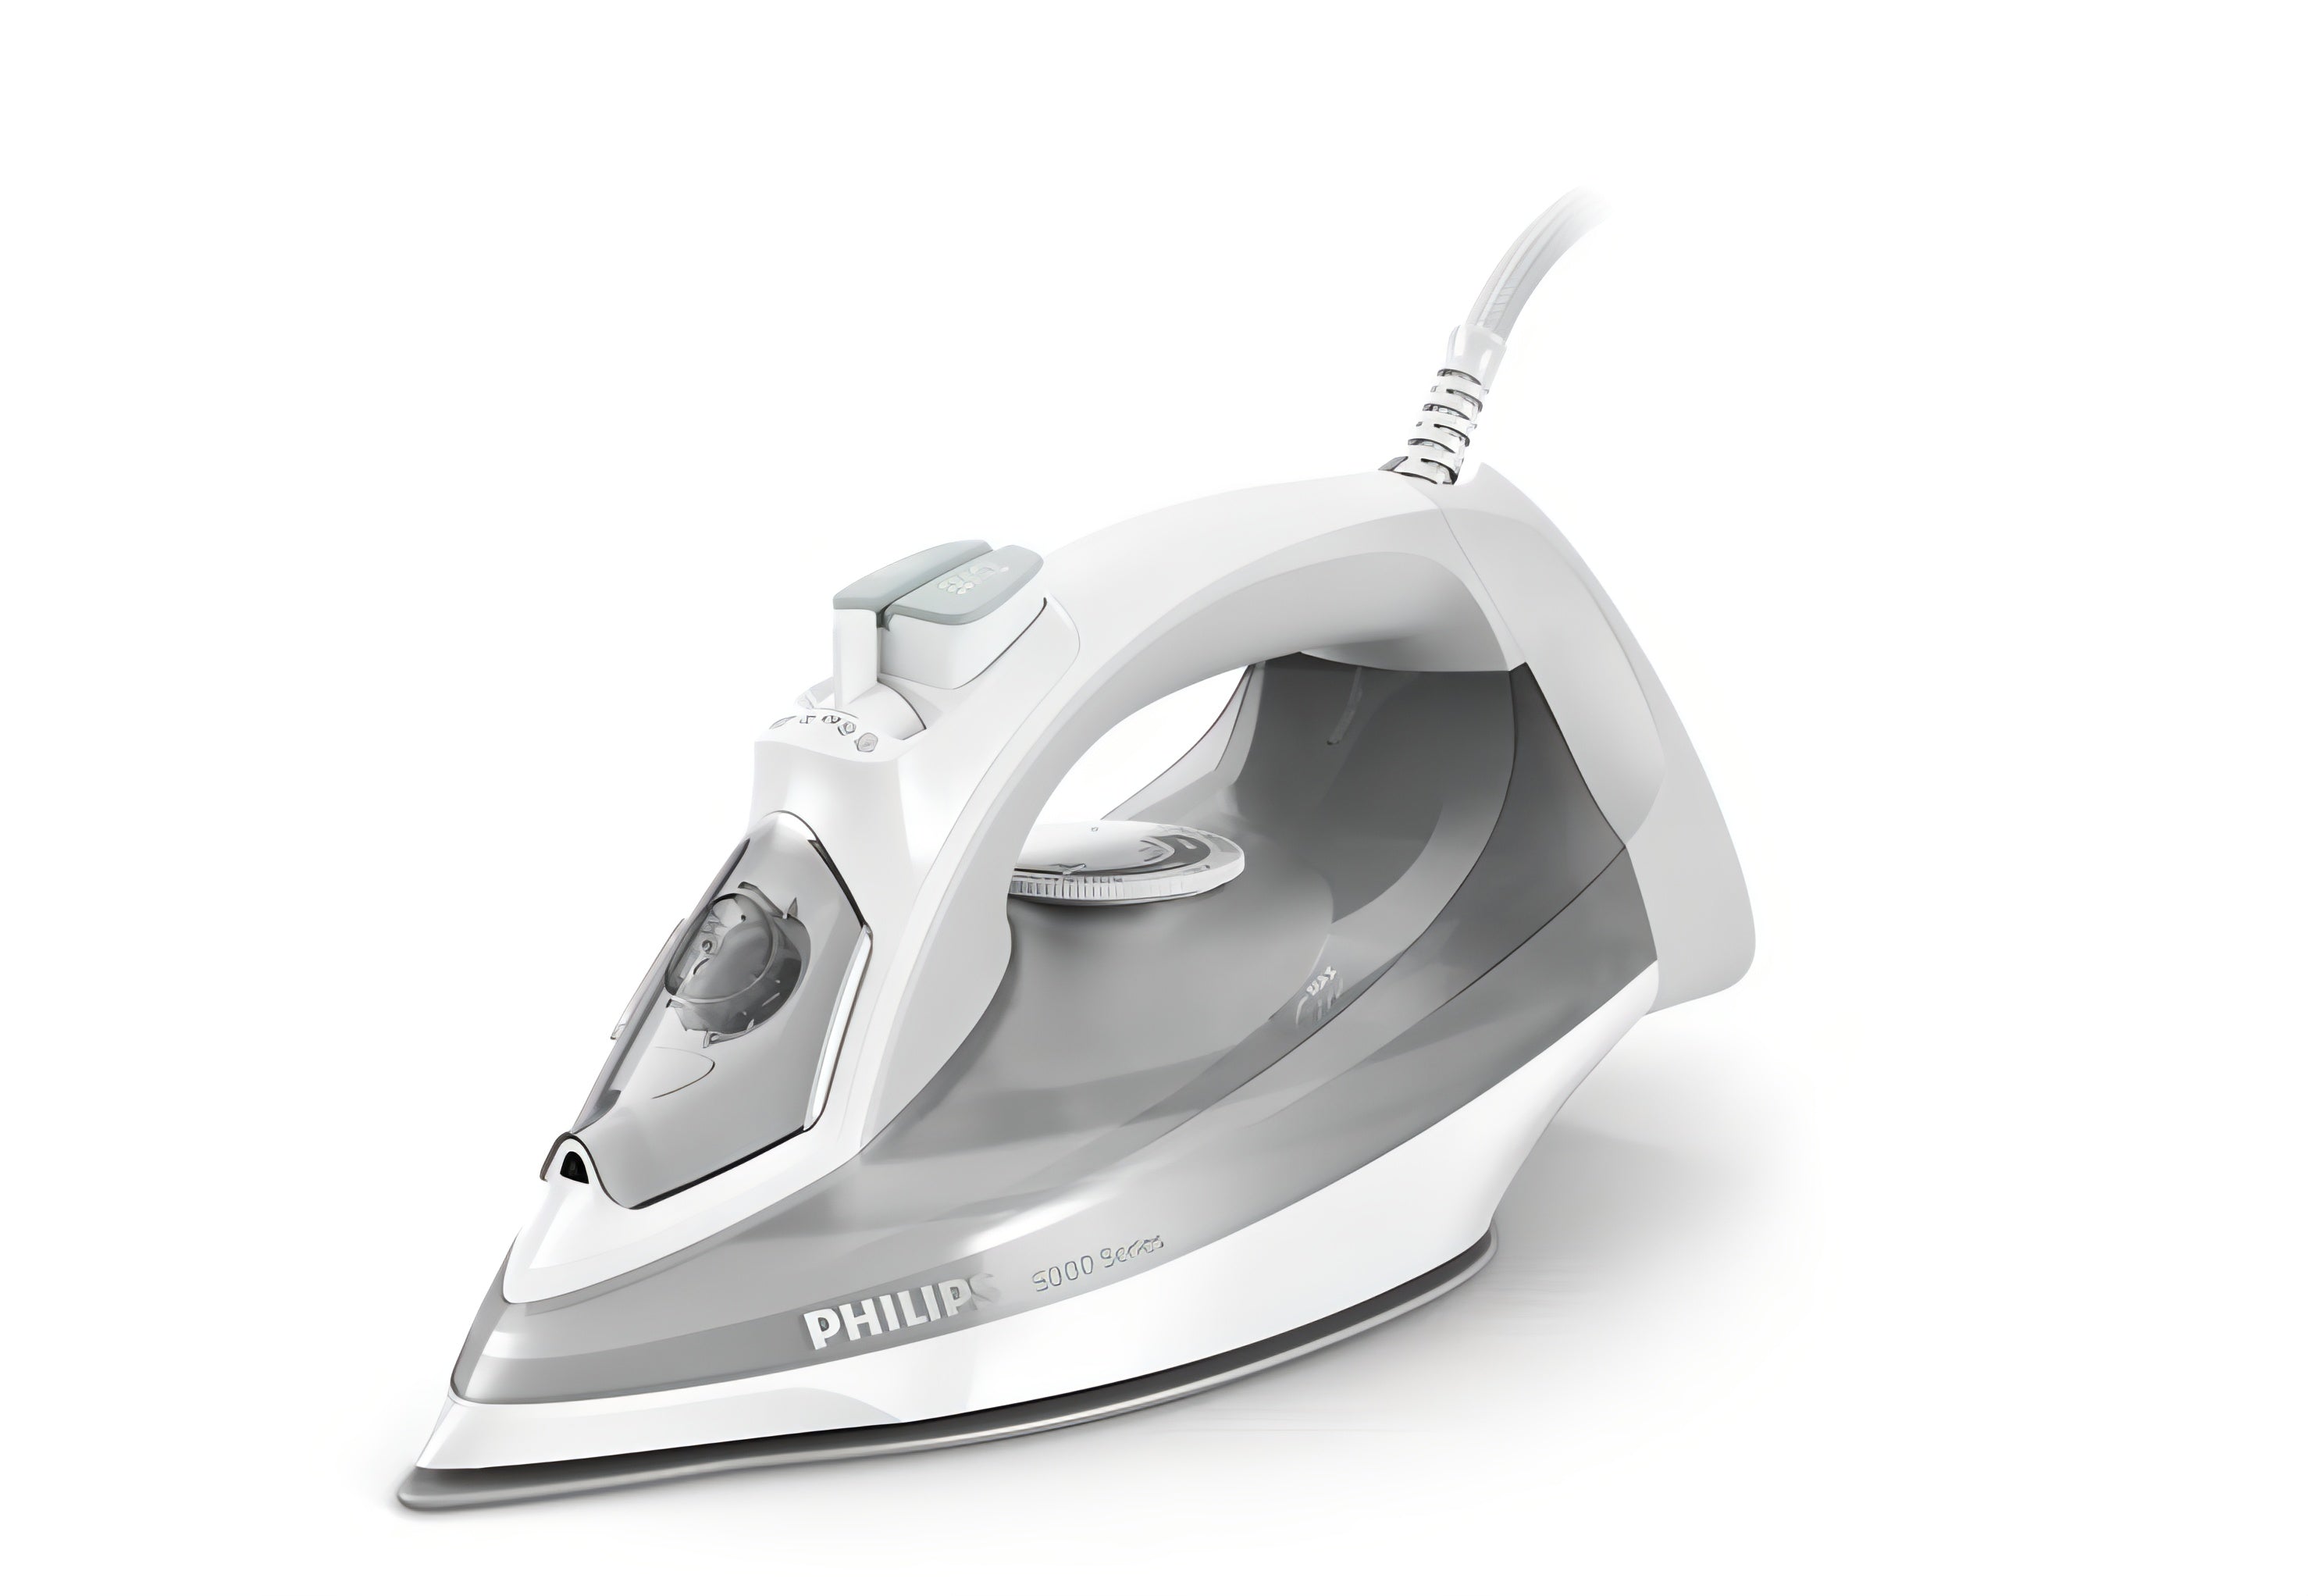 Philips Steam Iron 2400 W - DST5010/16 | reliable performance | lightweight | variable steam settings | safety features | stylish | even heat distribution | Halabh.com